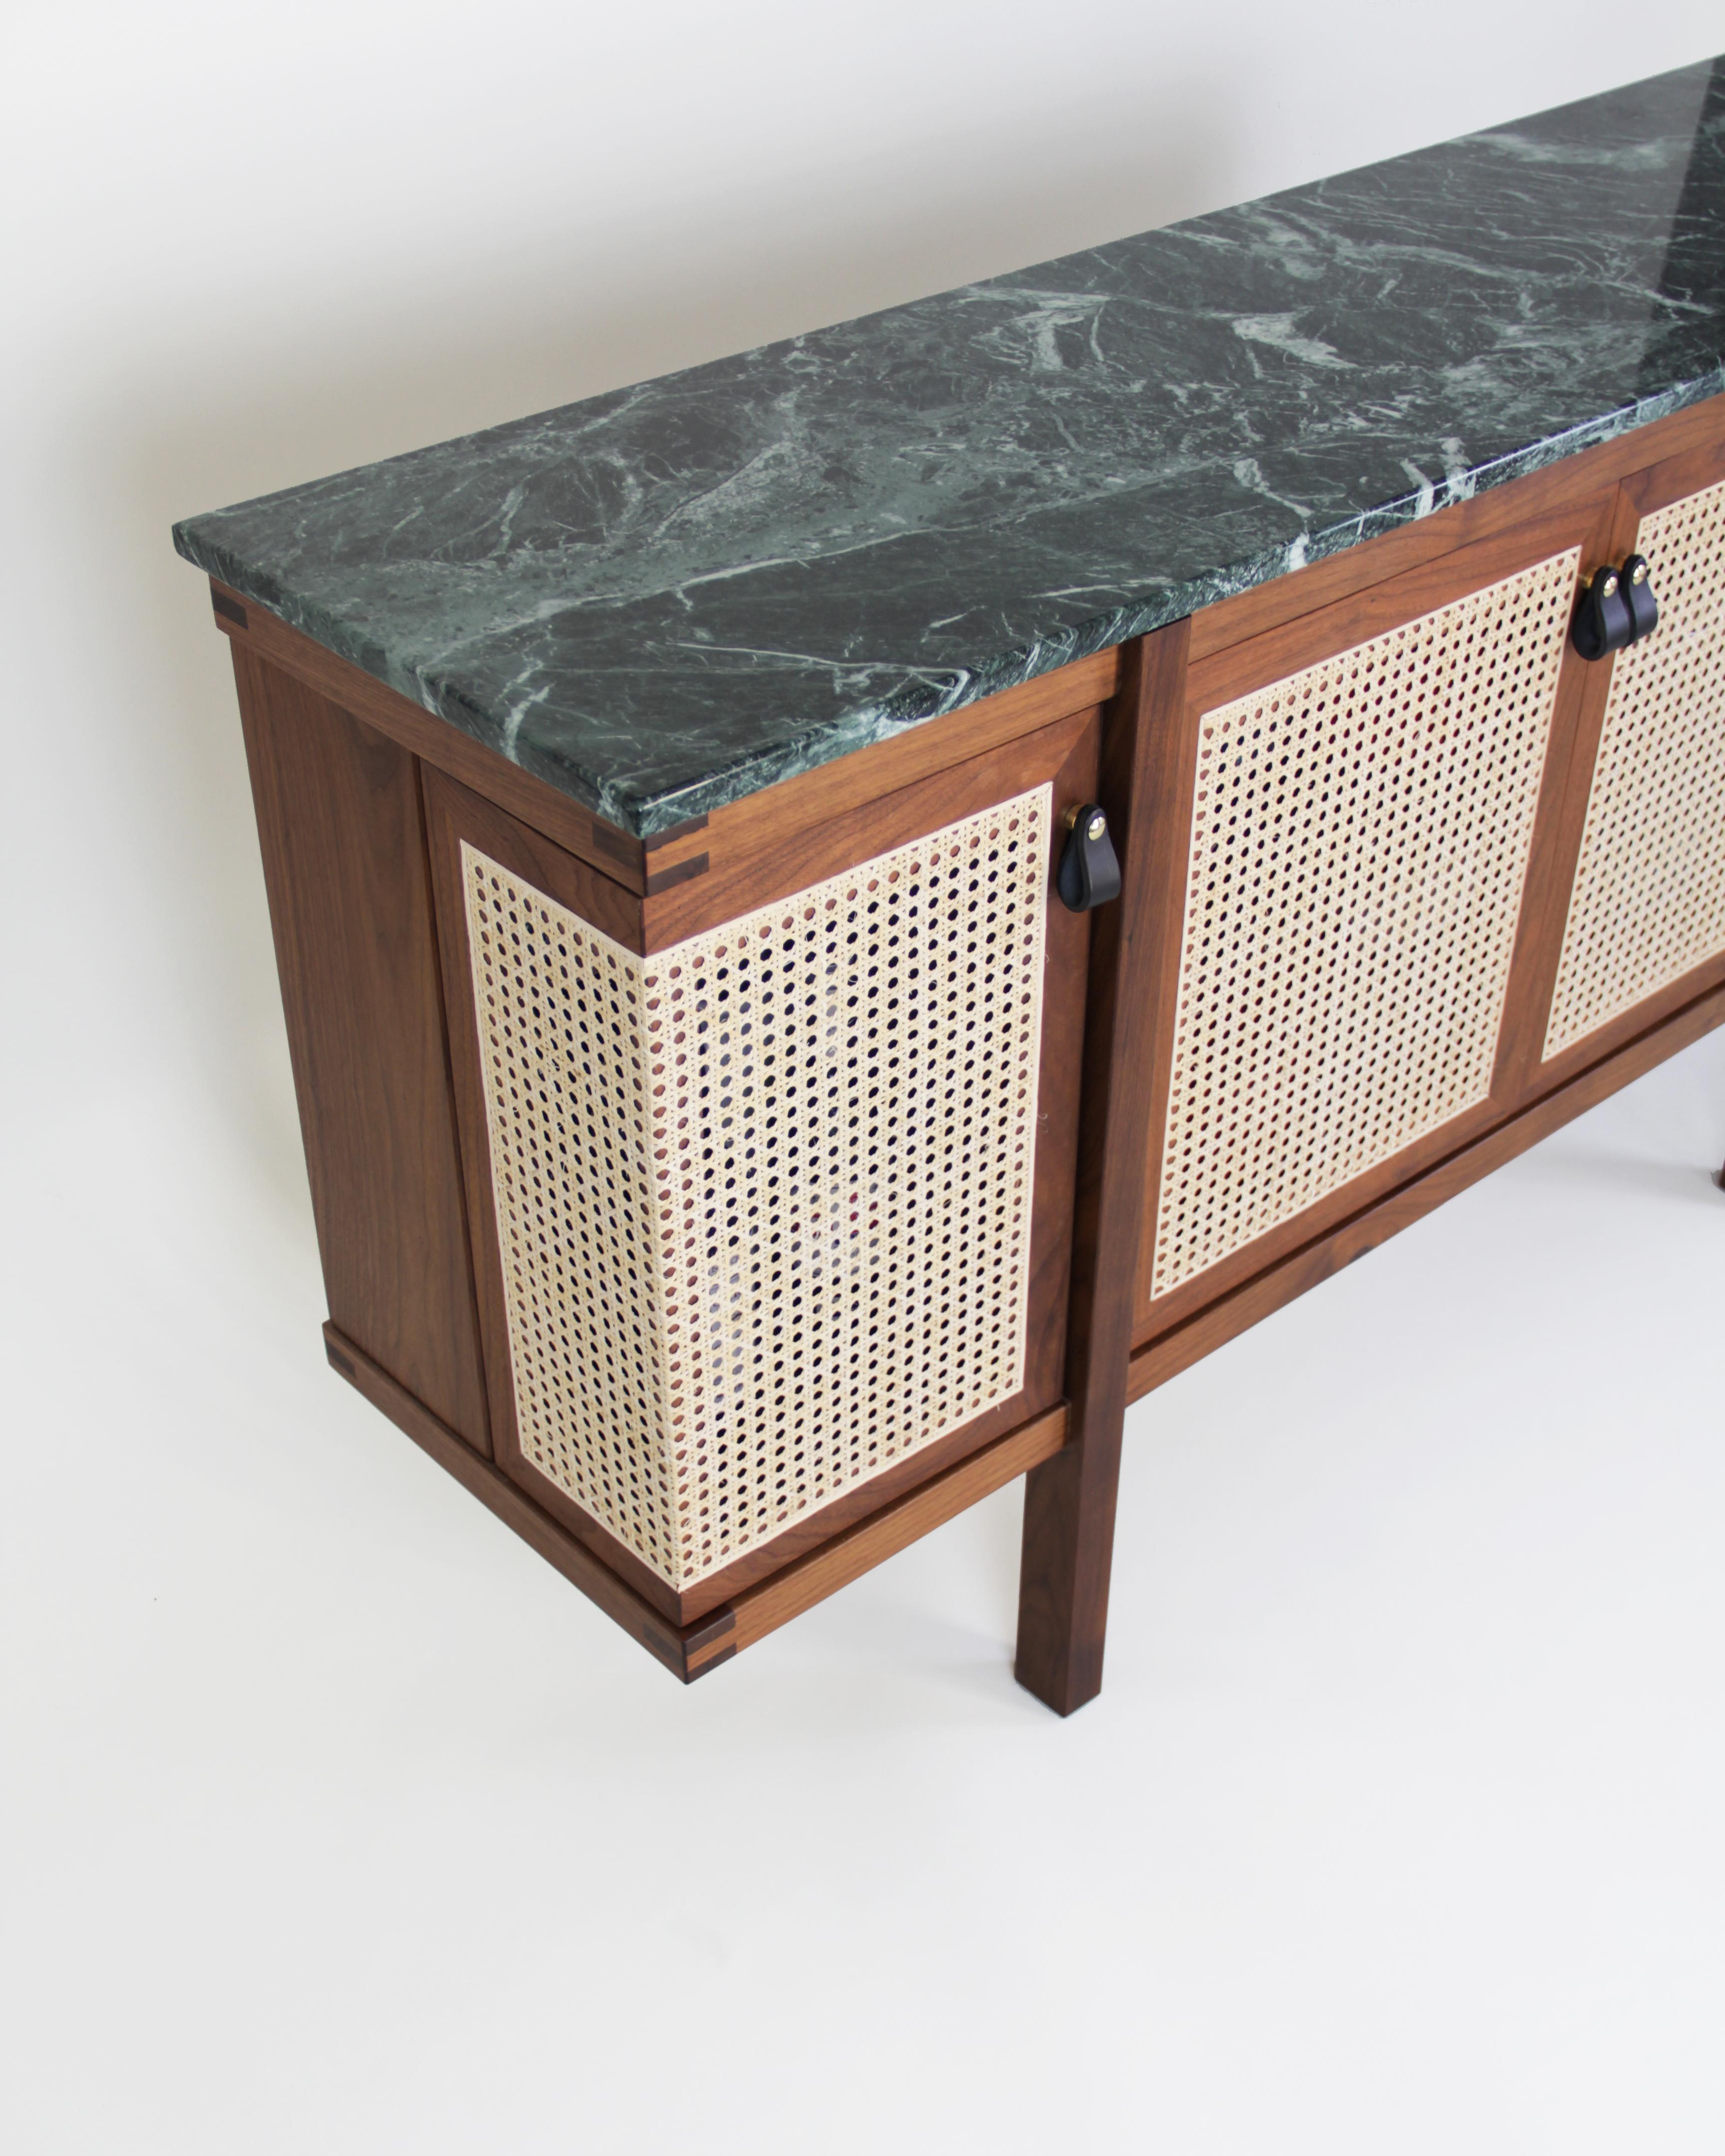 This vernacular Mid-Century Modern inspired console is superbly detailed as well as practical. Handcrafted from three separately fabricated boxes with doors that are inserted into the frame, it serves as a cabinet bar and credenza, offering ample